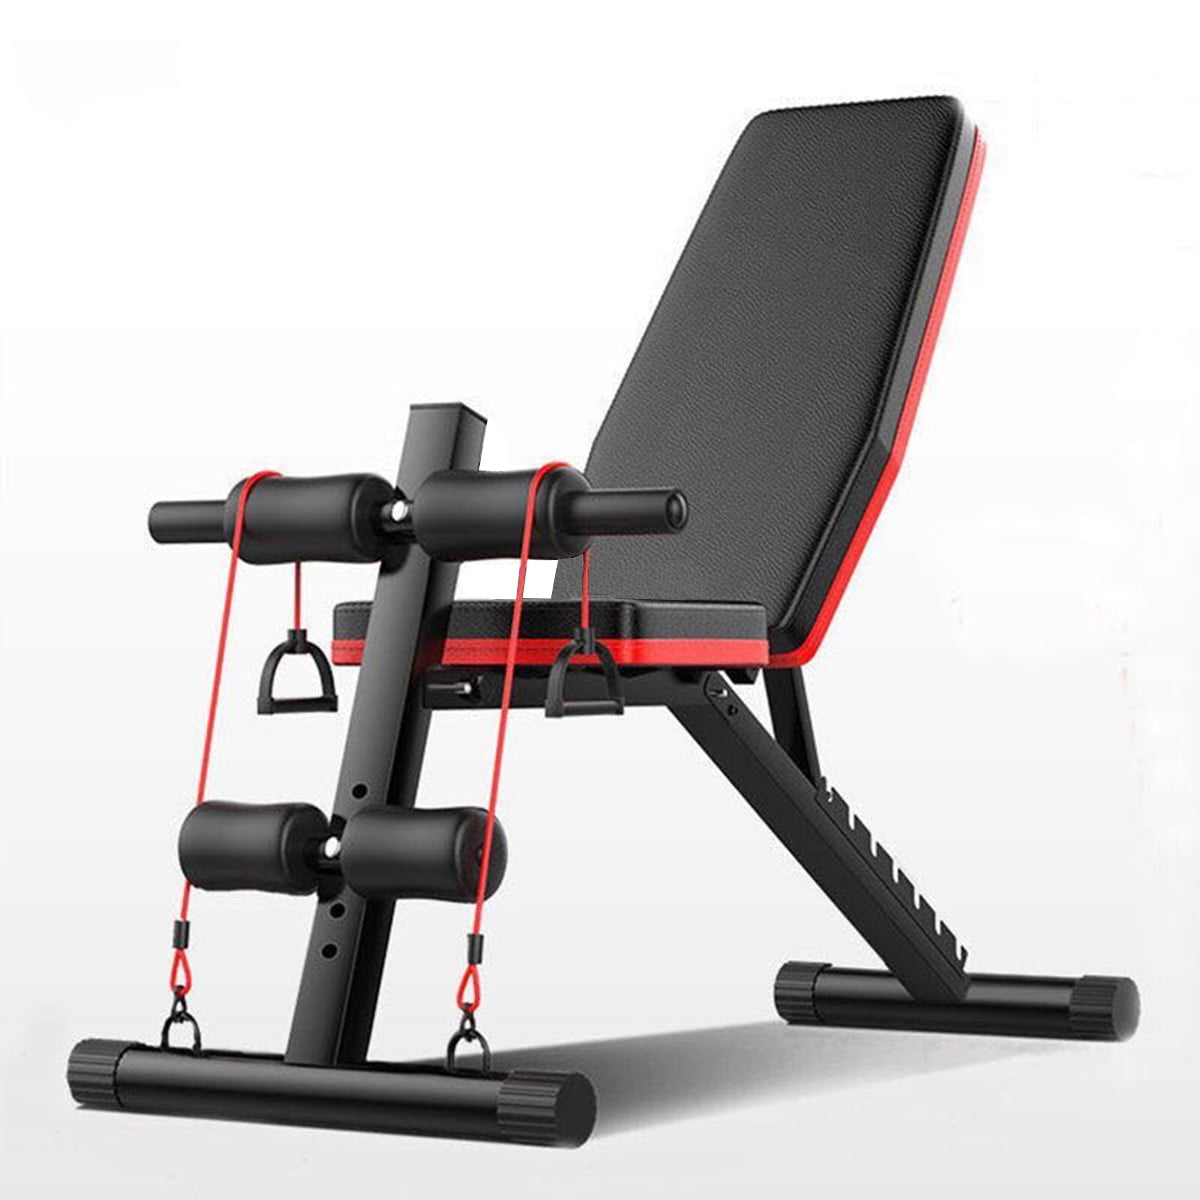 GYMENIST Exercise Bench Adjustable Foldable Compact and Easy to Carry NO Assembly Needed